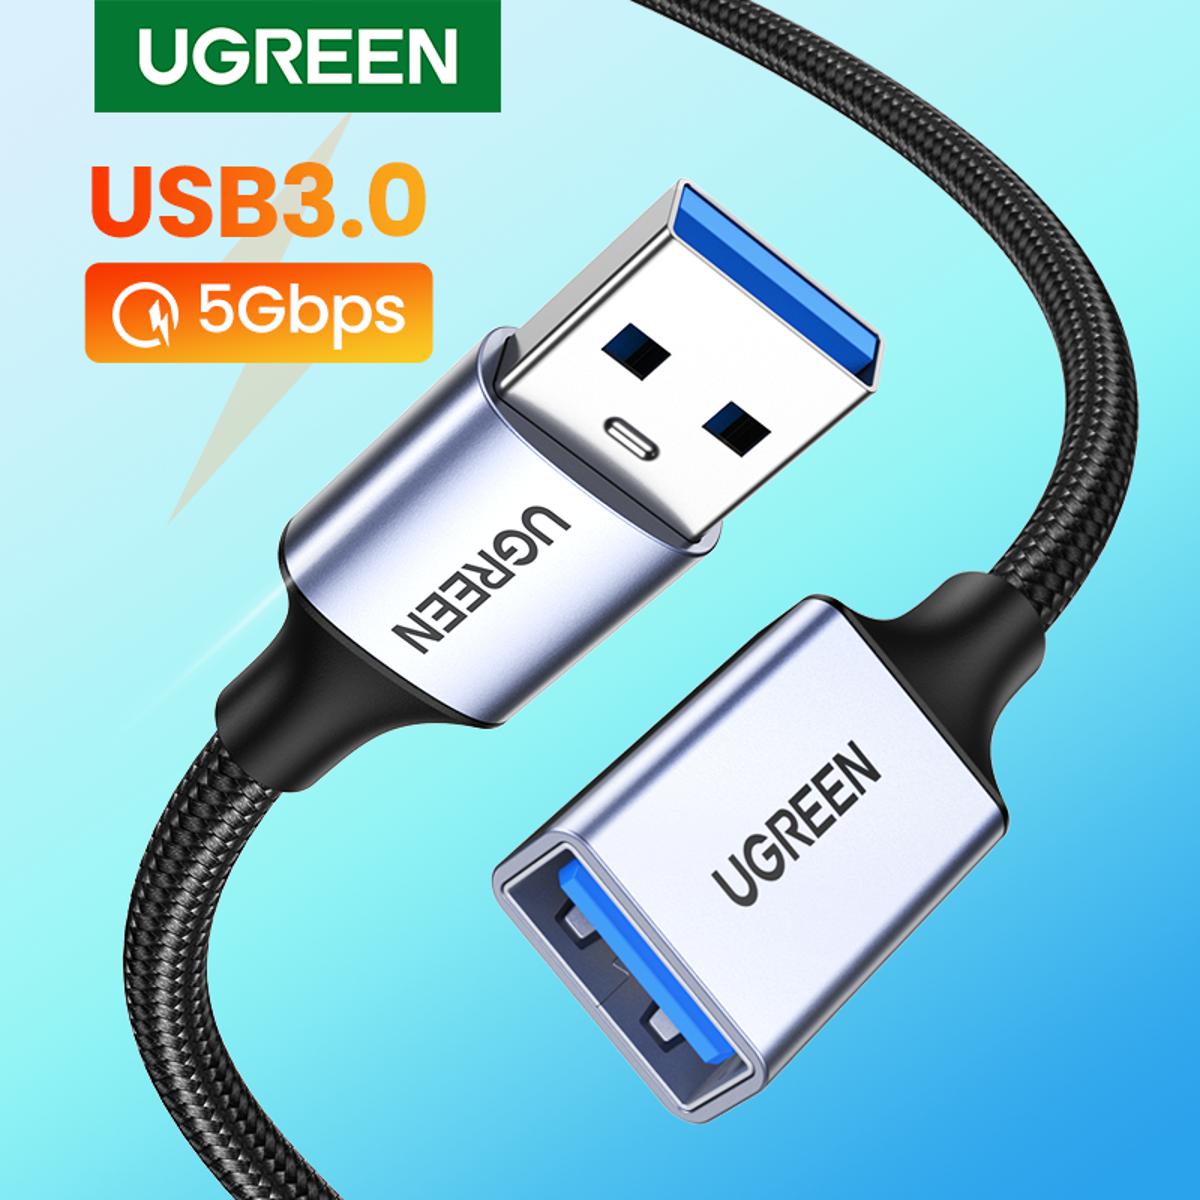 Ugreen Cable USB 3.0 1M